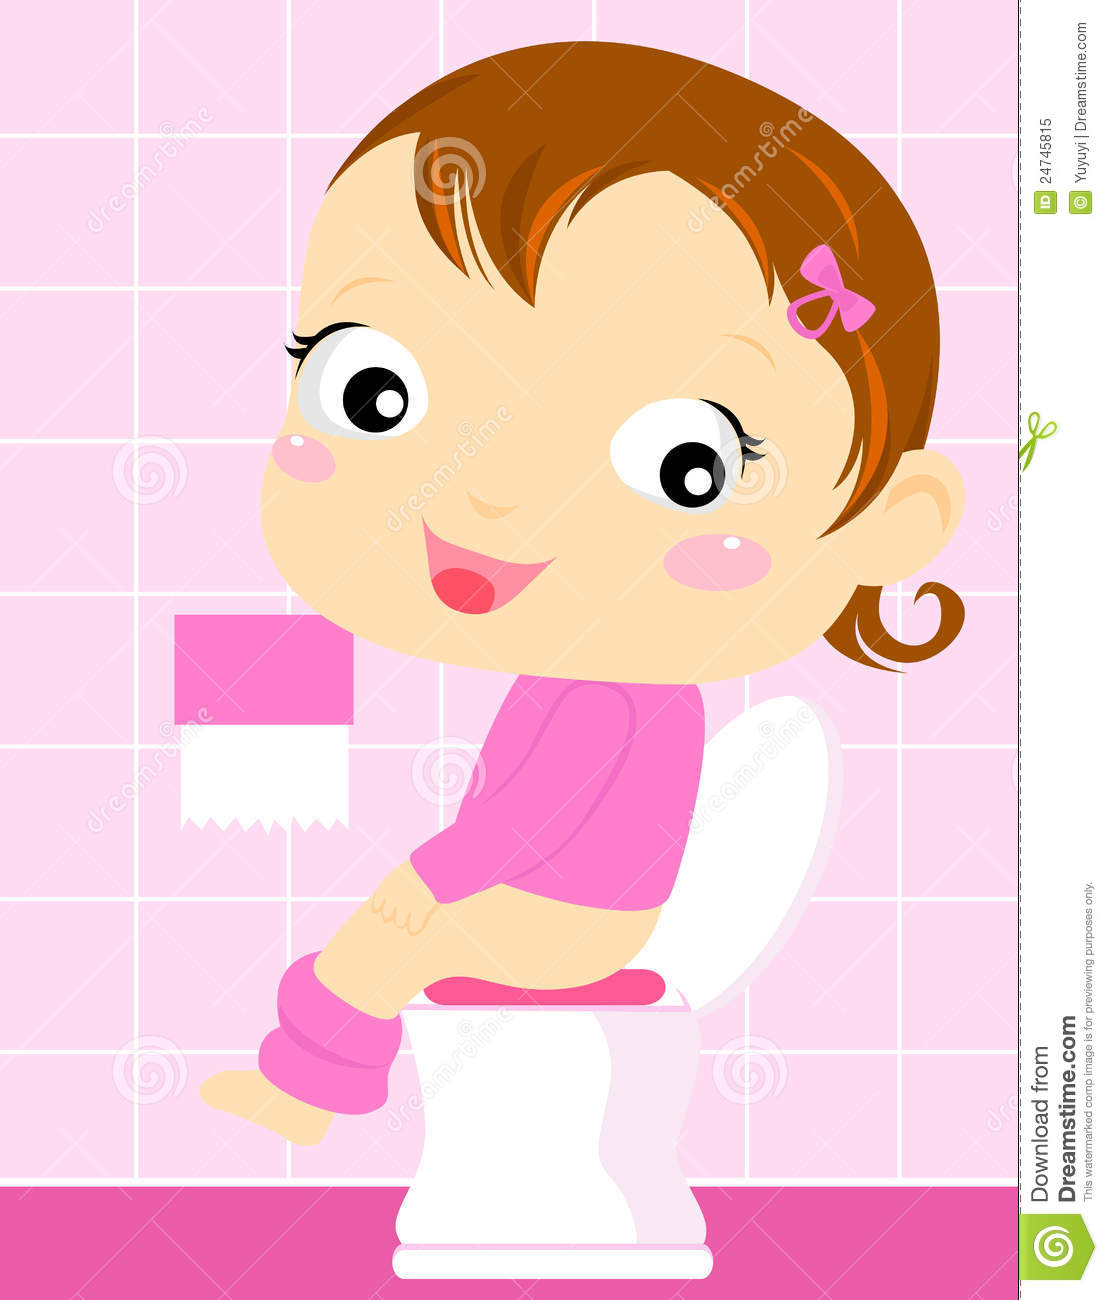 Little Girl Toilet Painting Royalty Free Stock Photo   Image  24745815